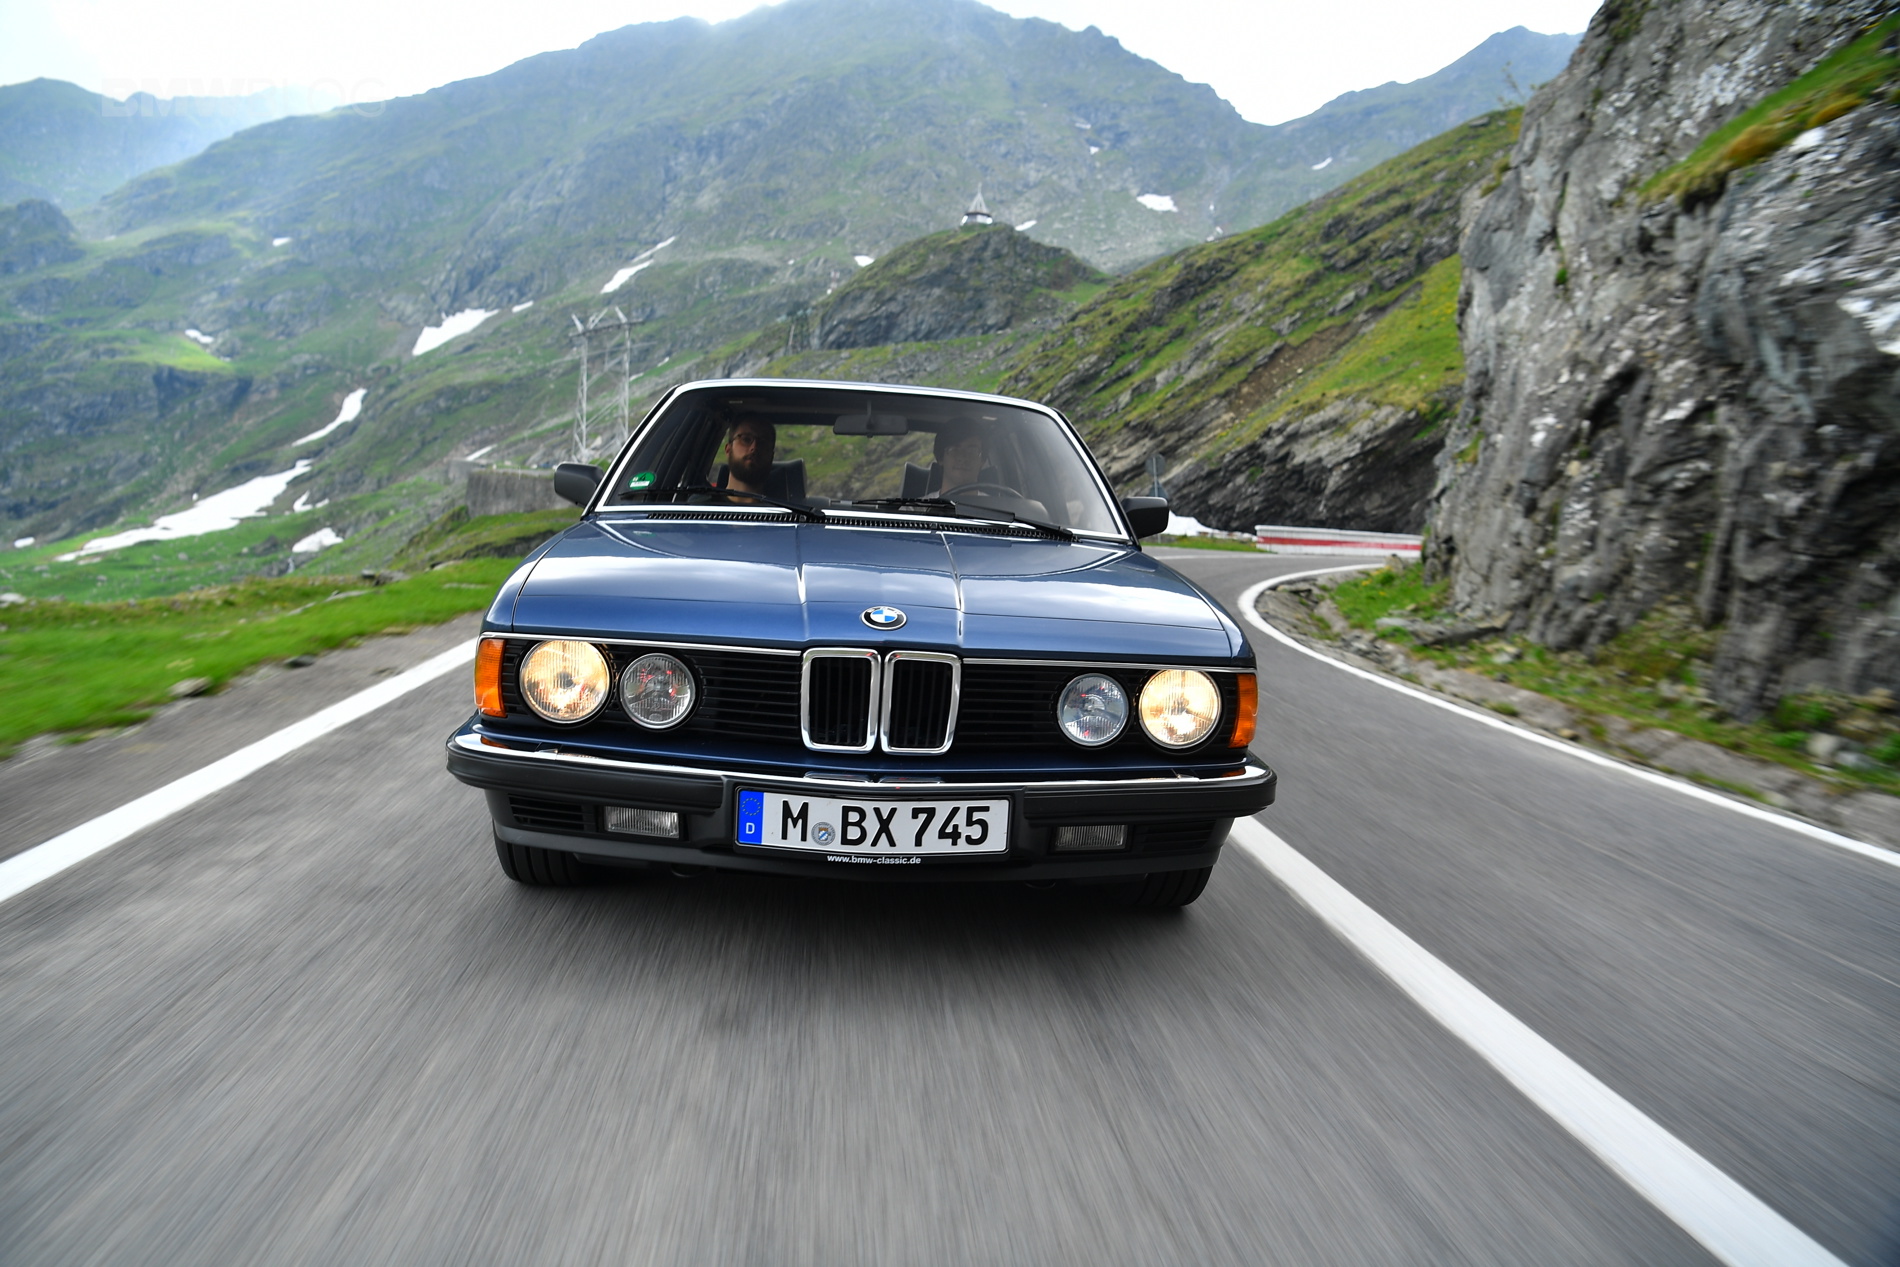 BMW E23 7 Series conquers the land of Dracula